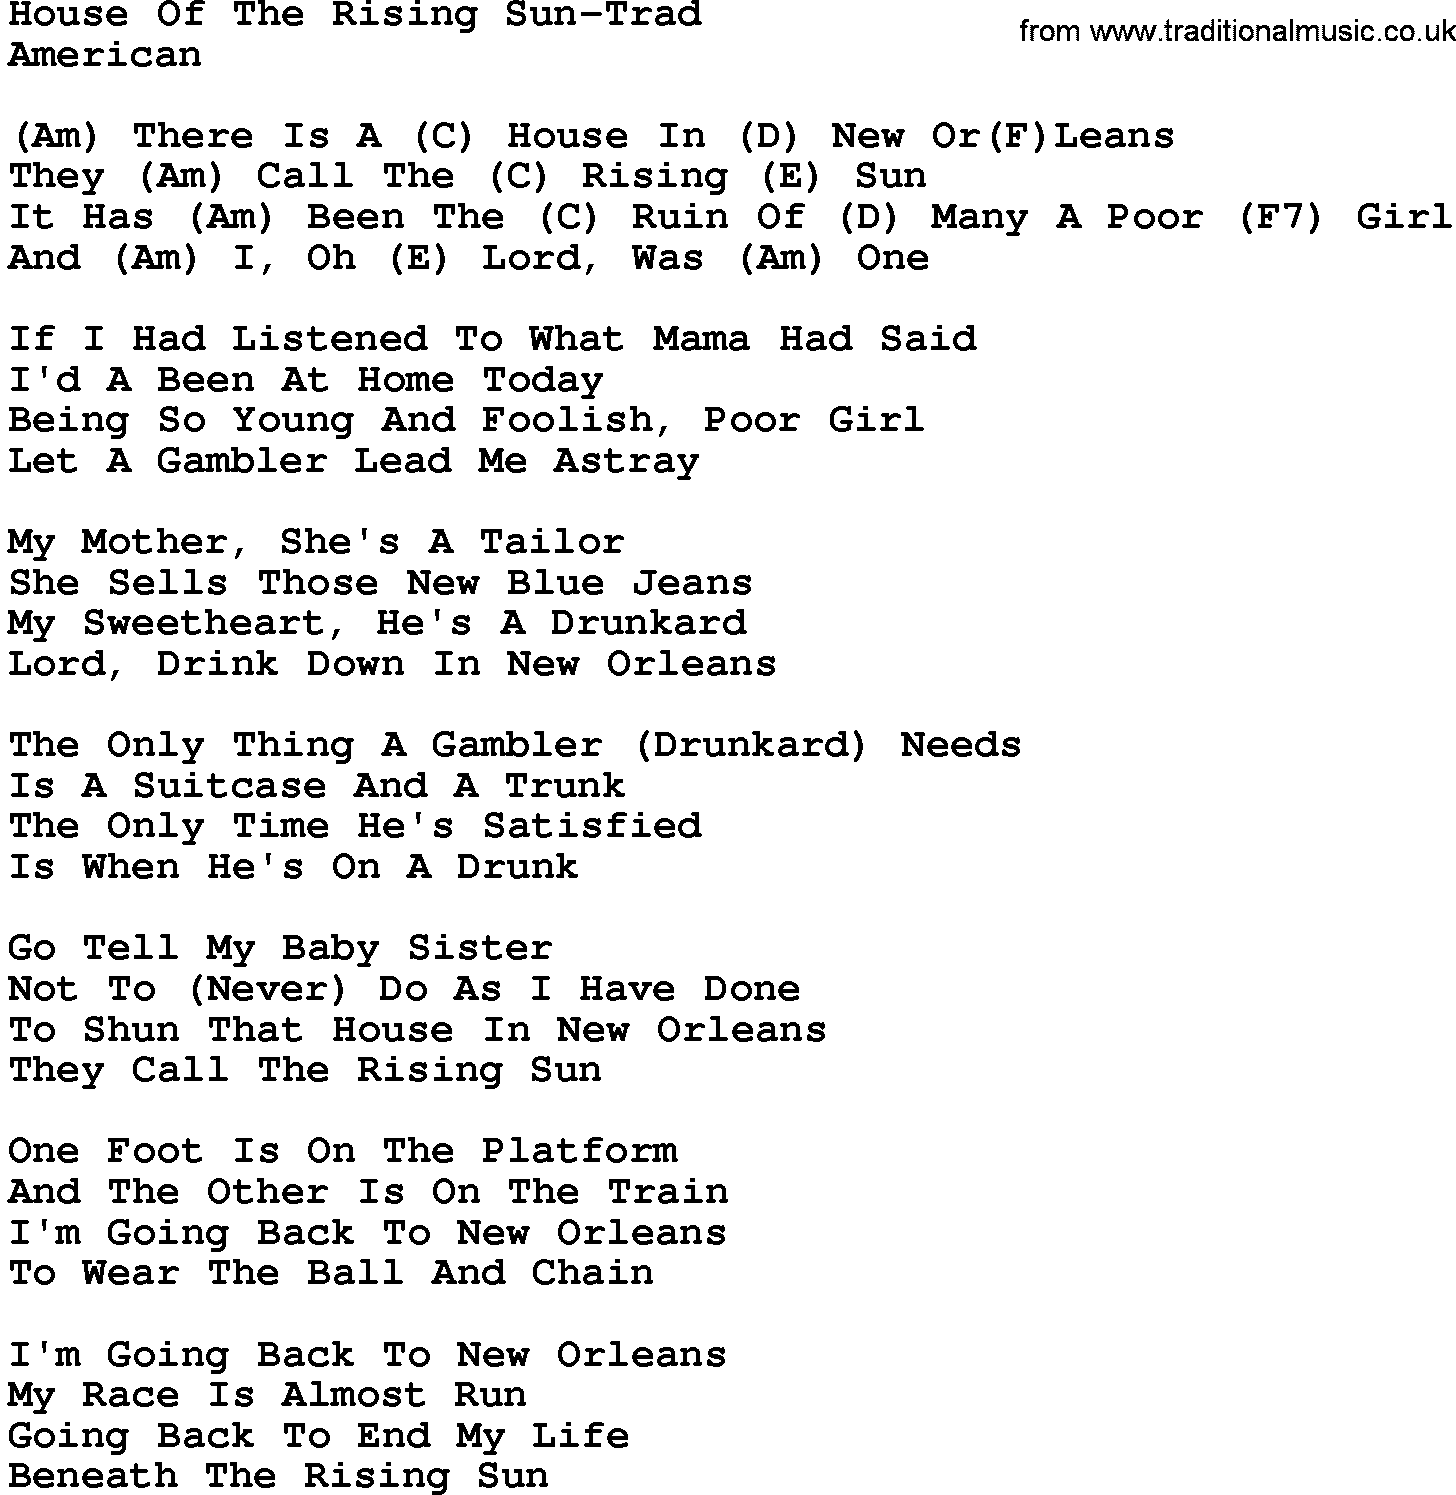 Country music song: House Of The Rising Sun-Trad lyrics and chords